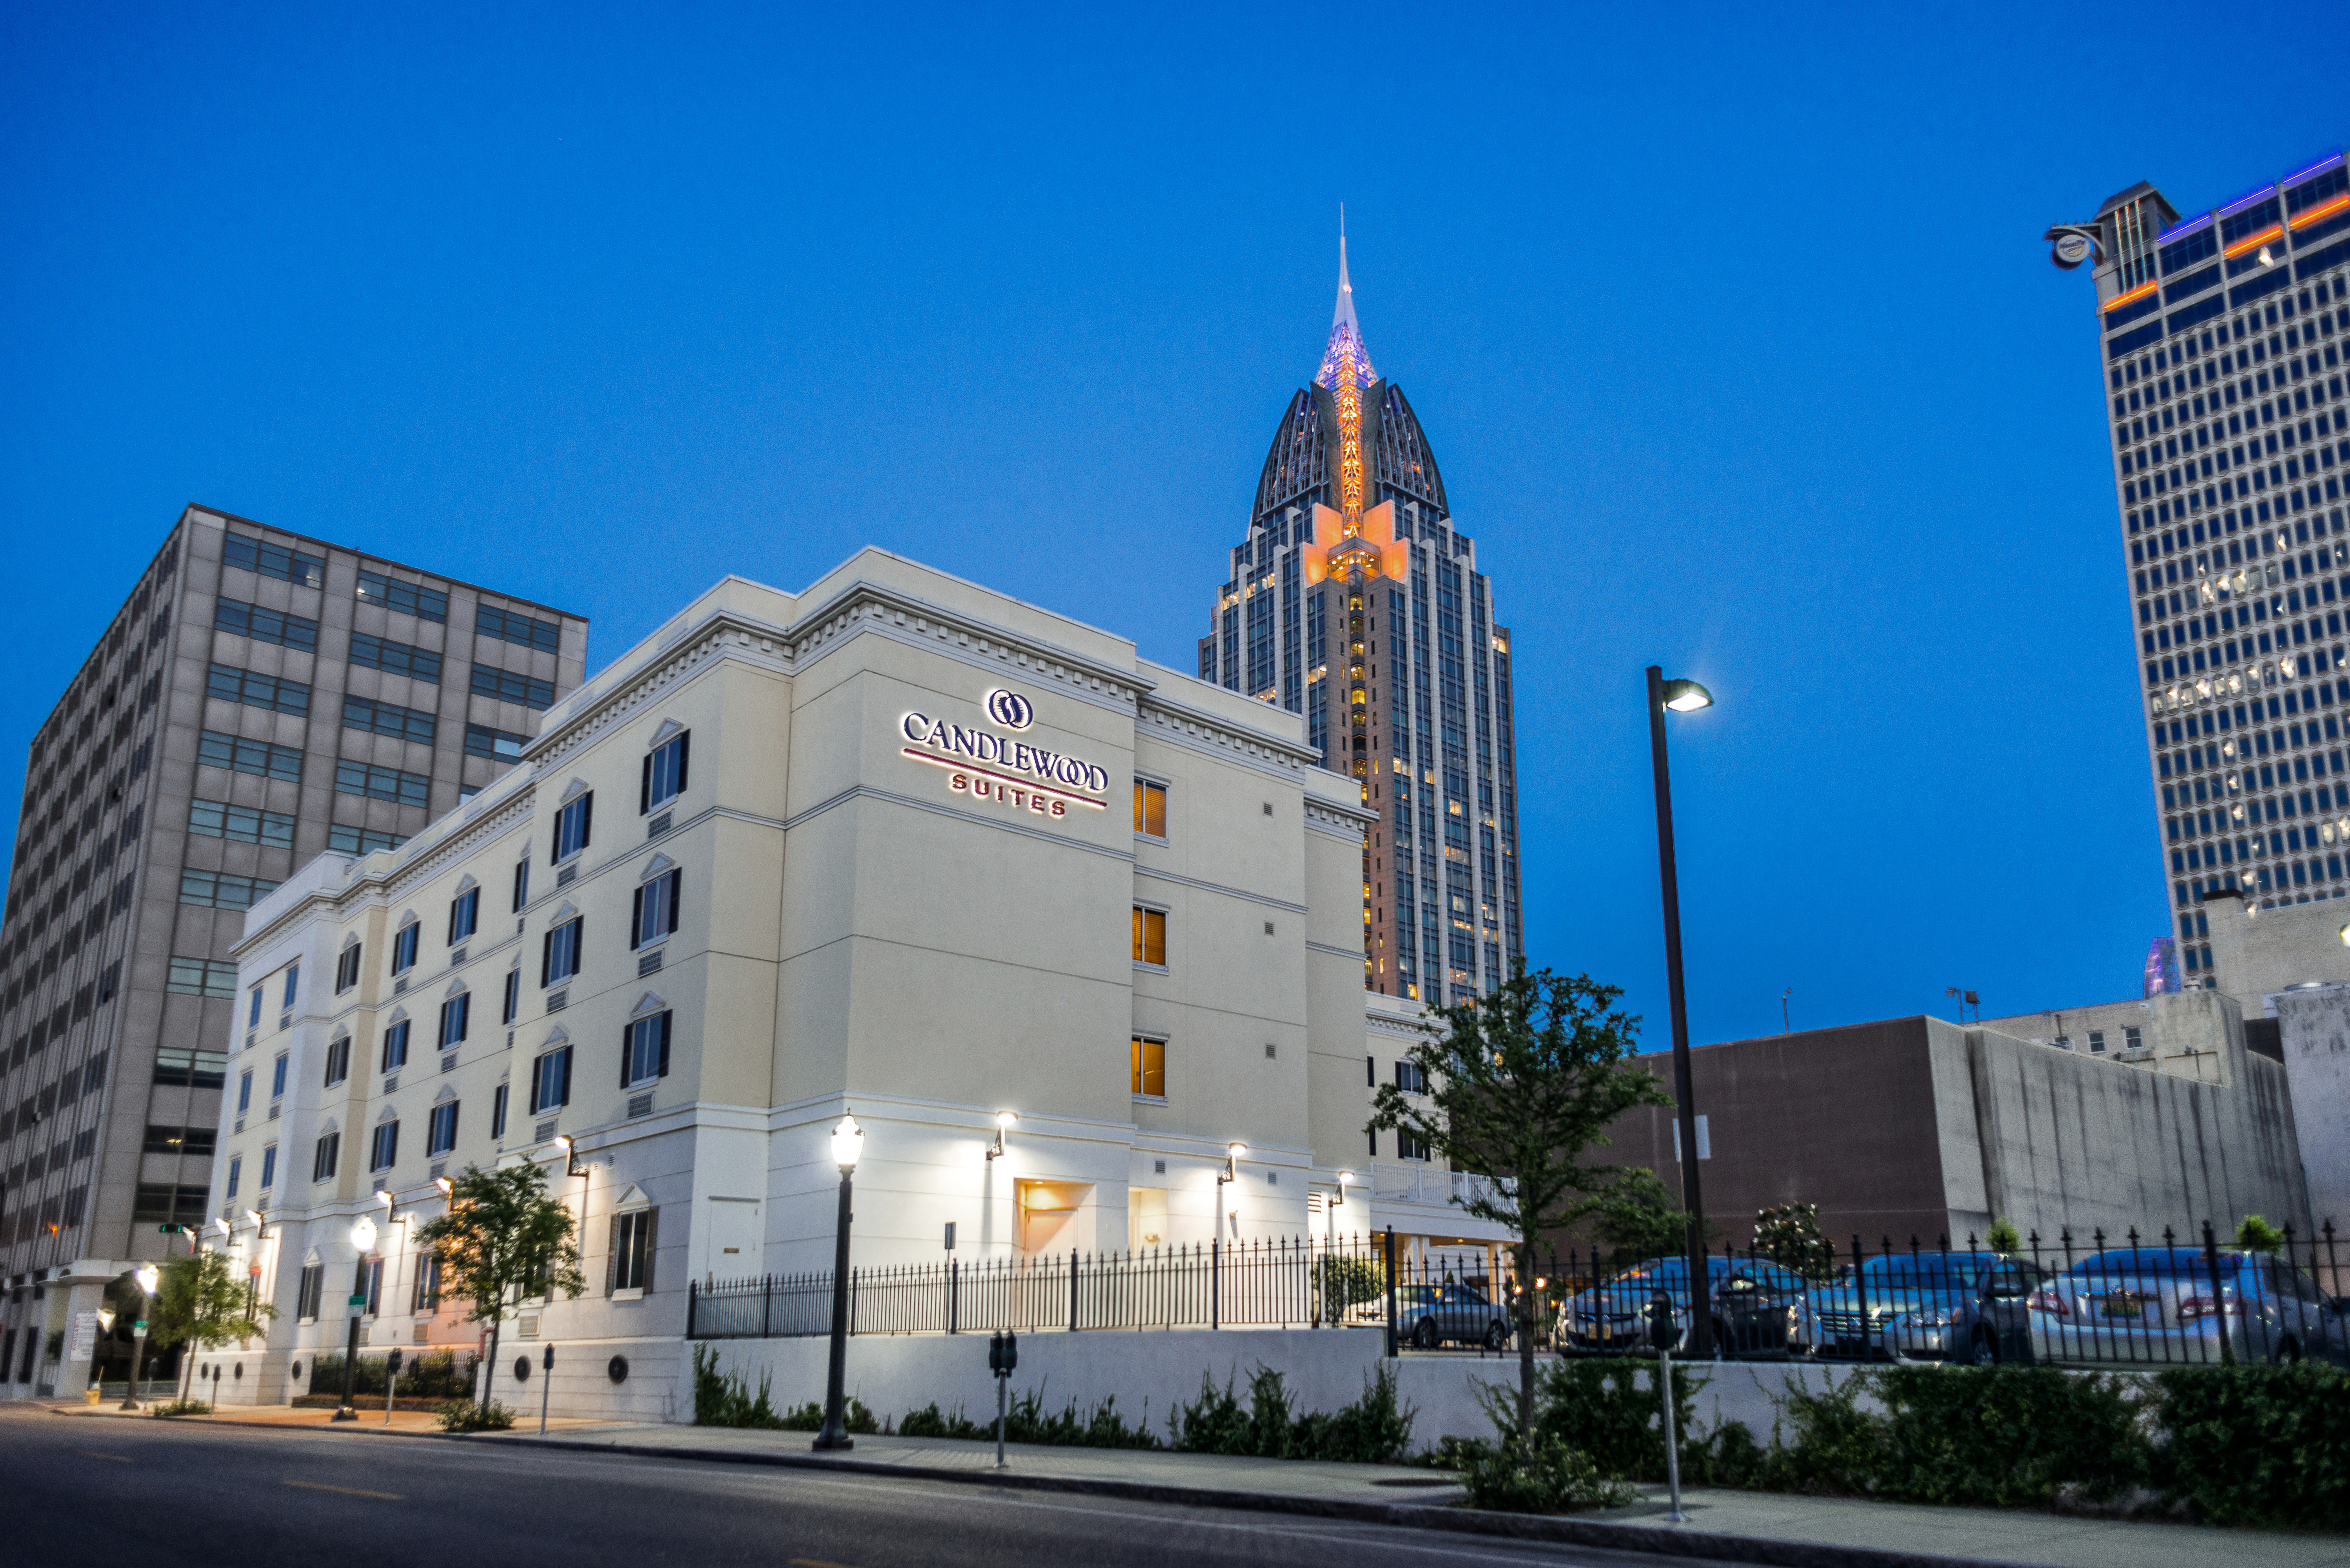 Candlewood Suites Downtown Mobile